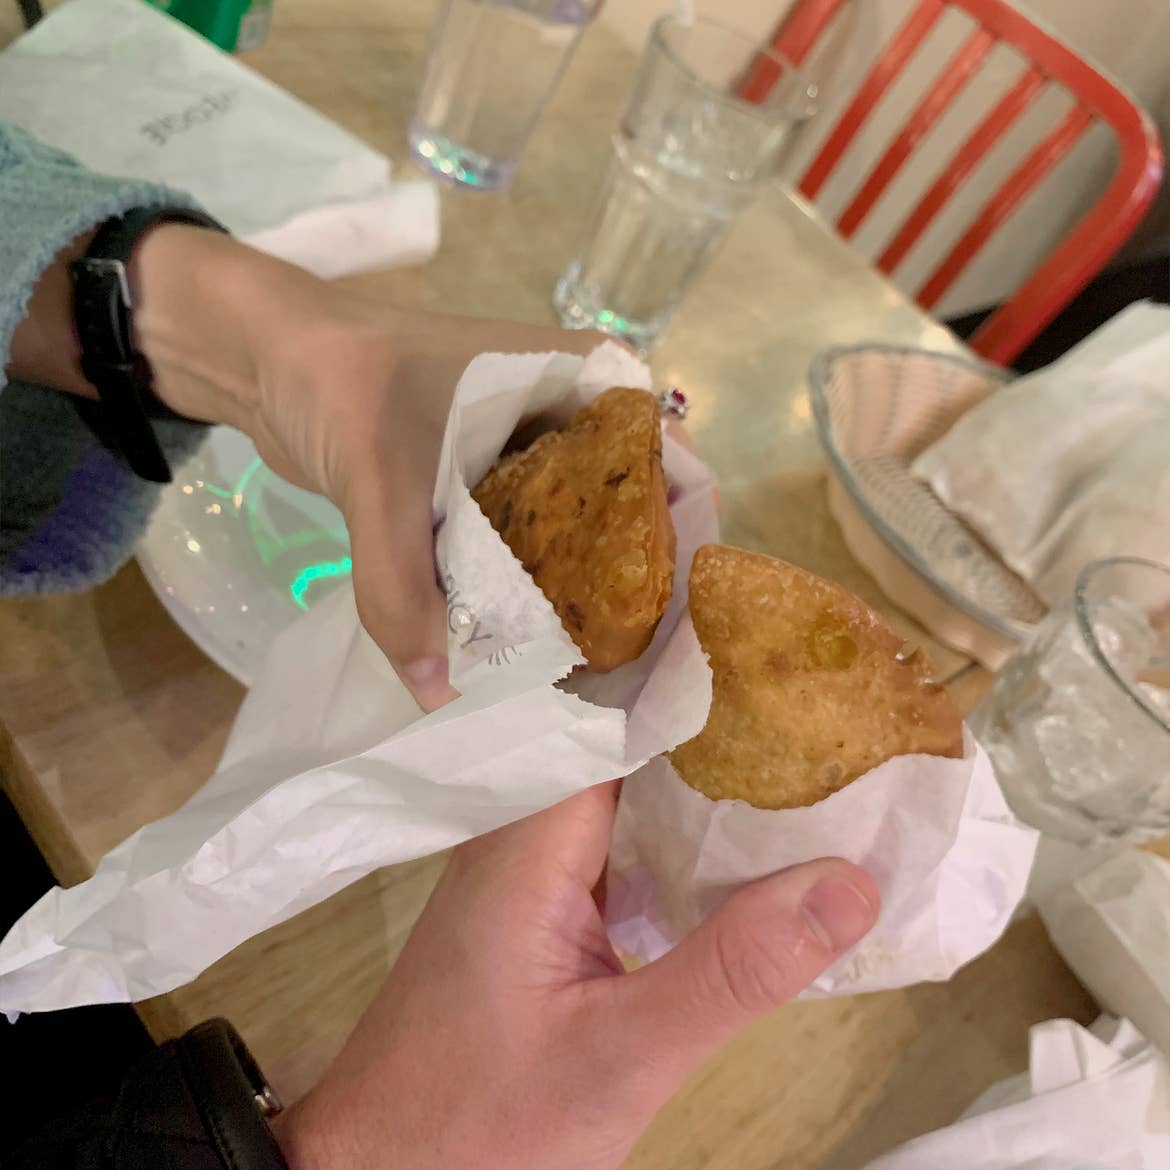 The hands of a Caucasian male and female hold a pair of empanadas over a table.